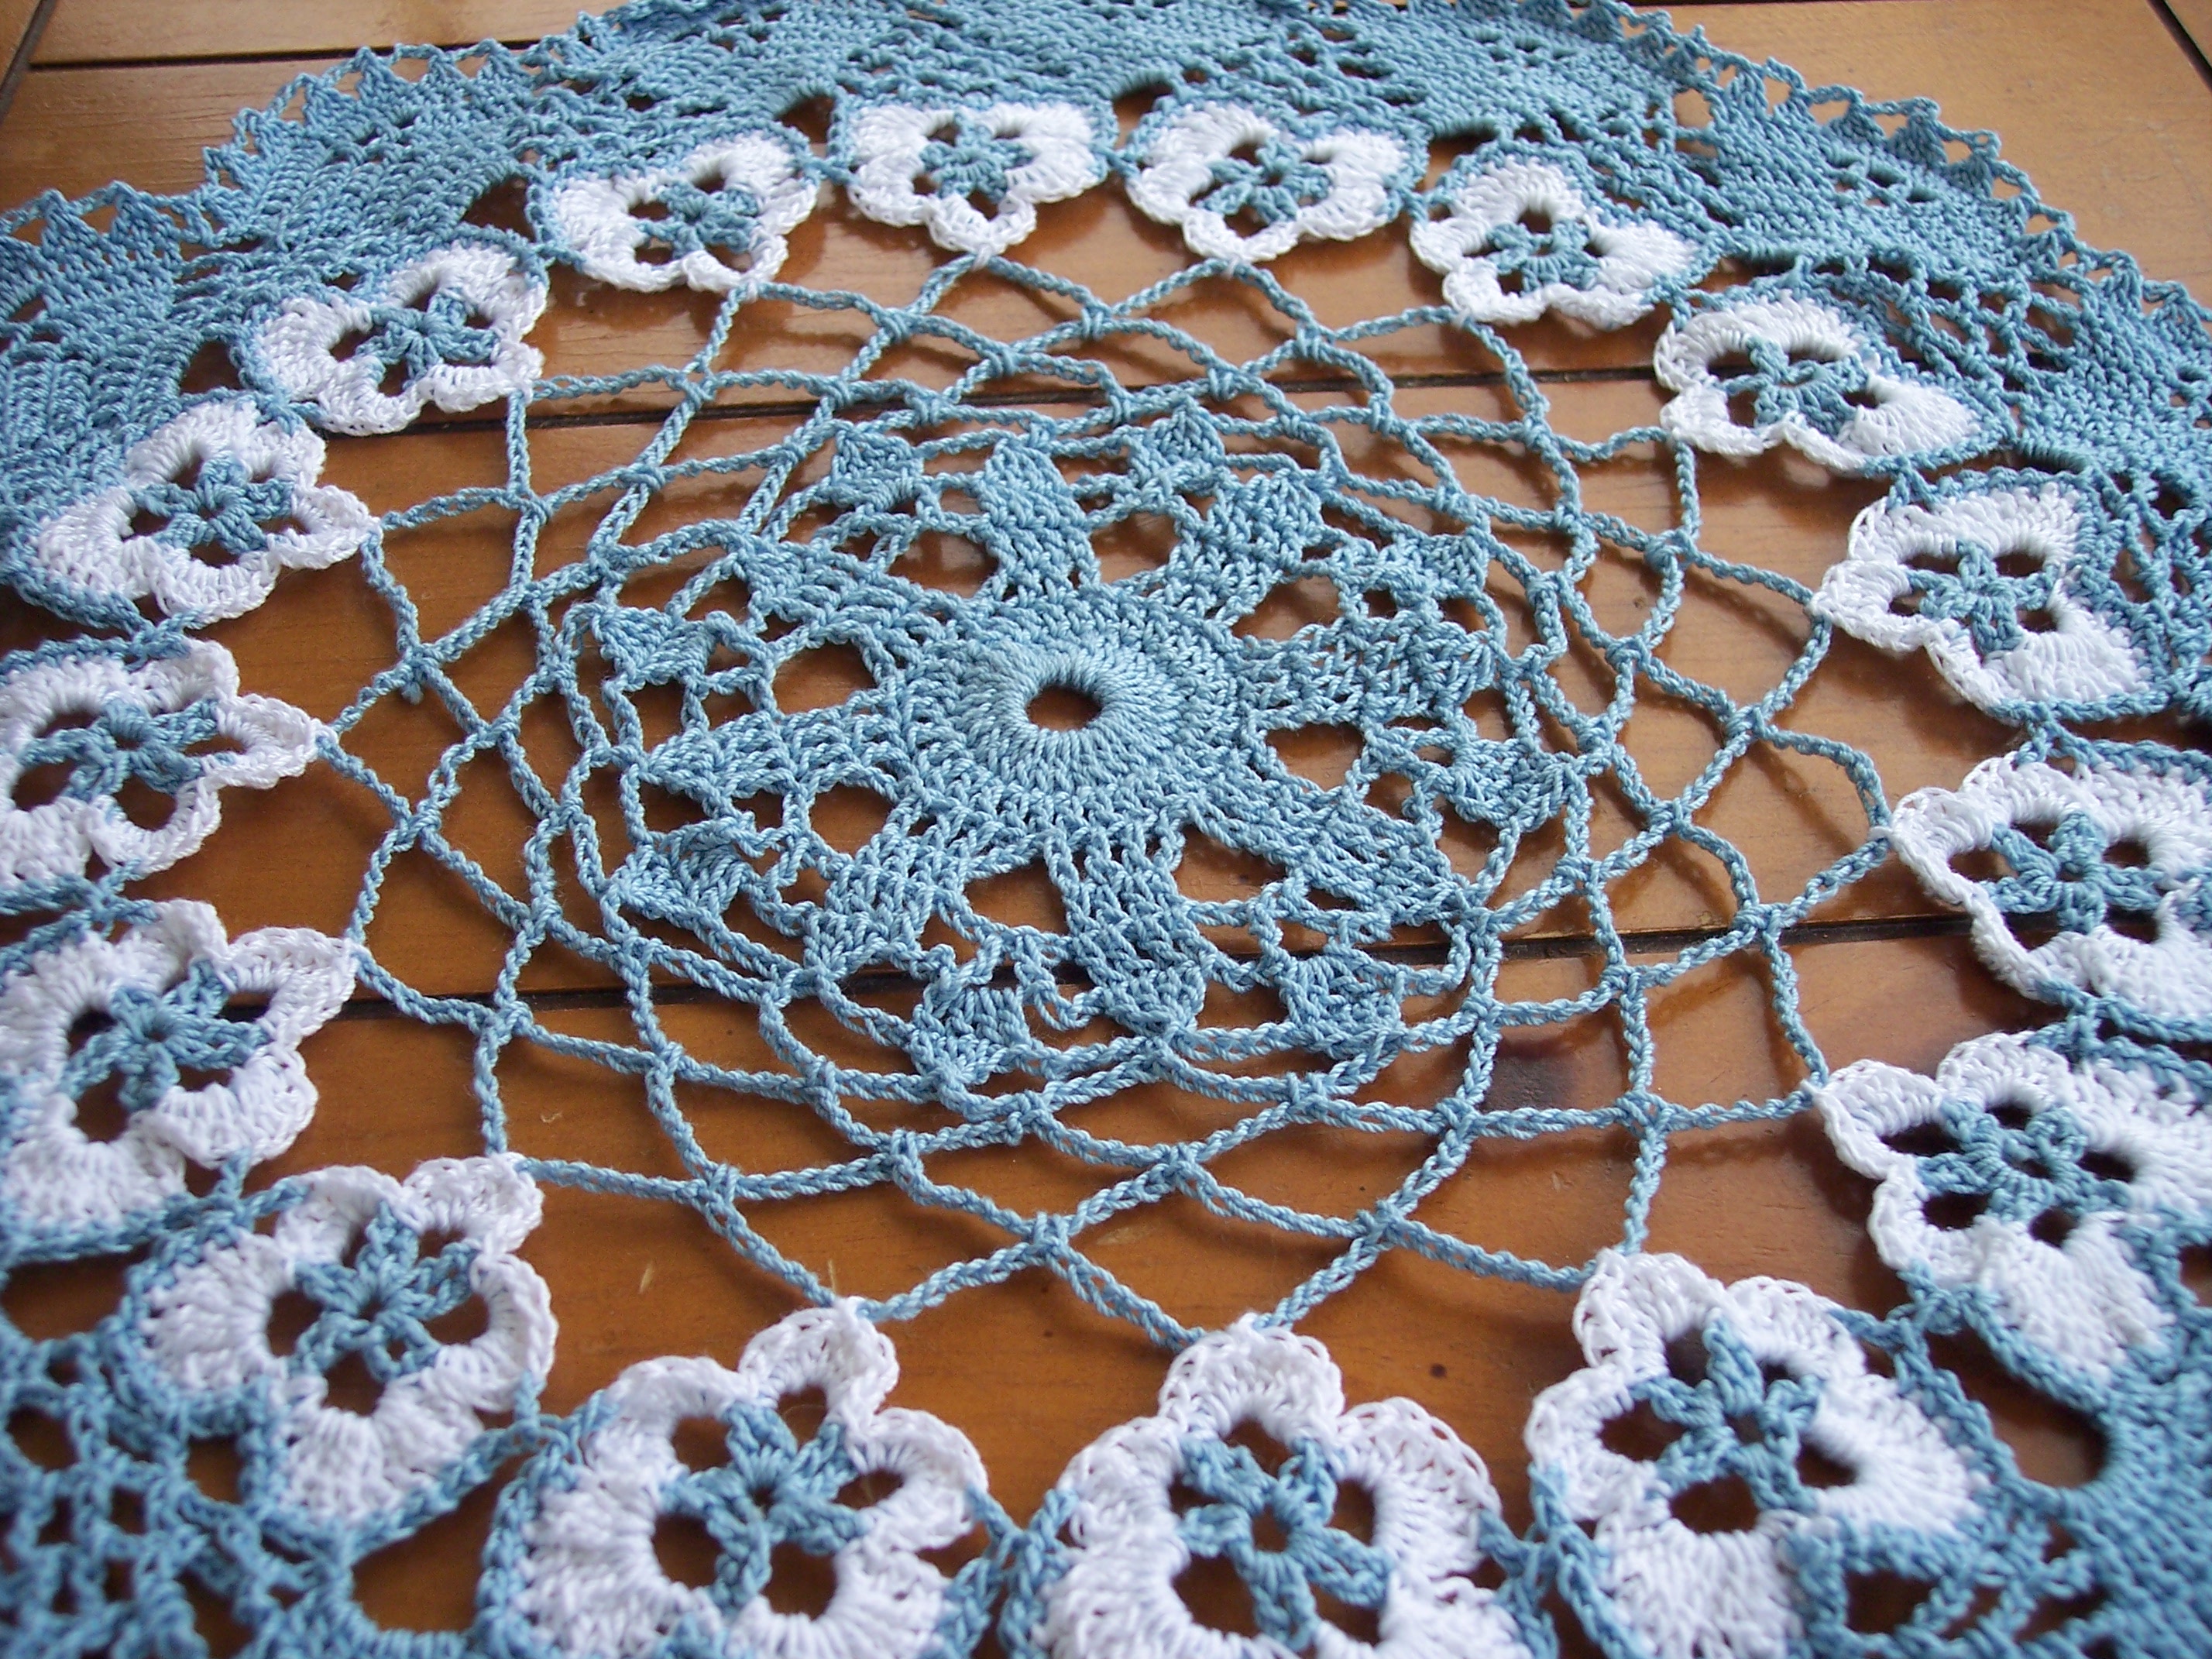 FINALLY my doily is done!